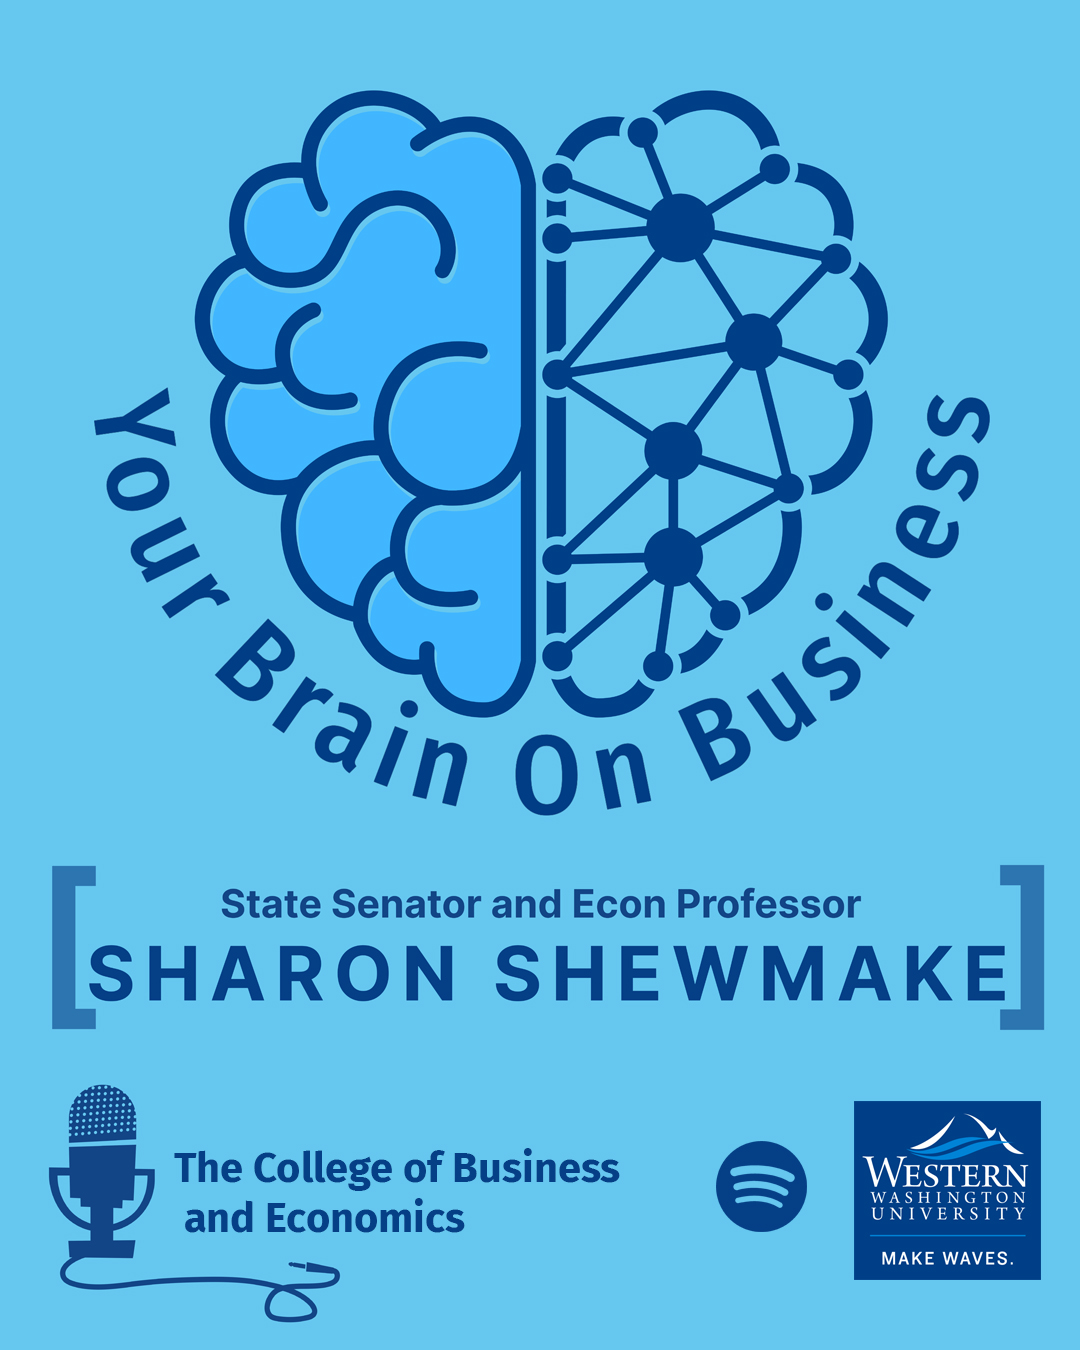 Your Brain on Business